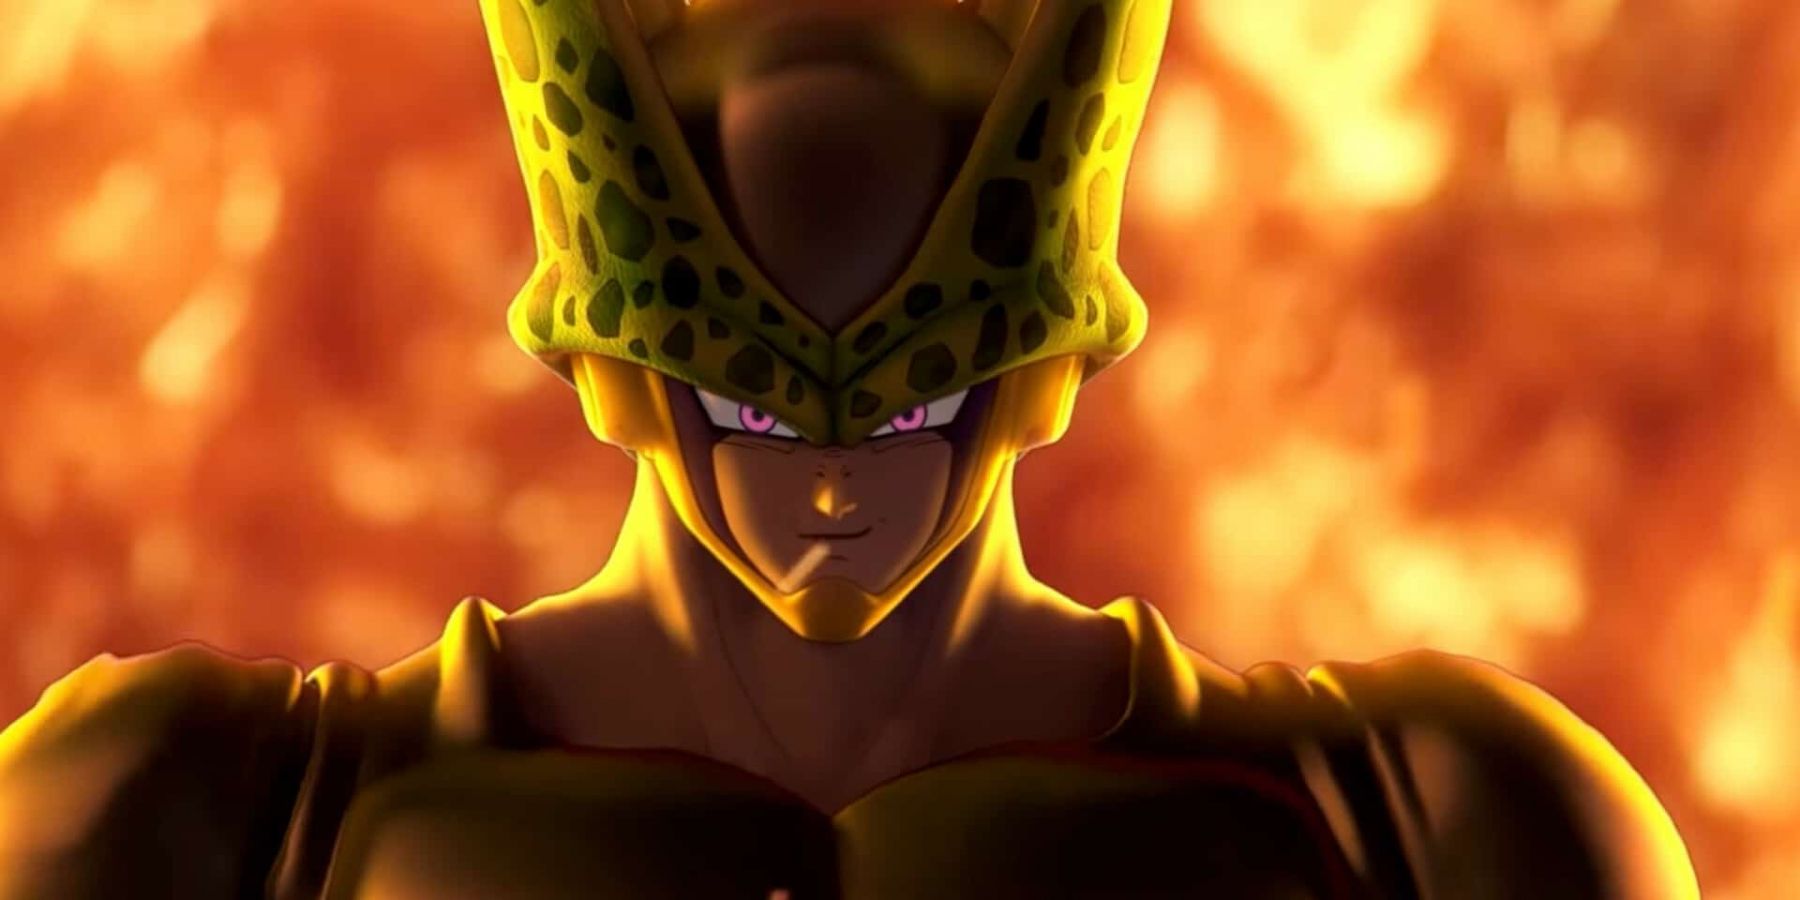 Players will get to play through the villains' iconic transformations in Dragon Ball: The Breakers